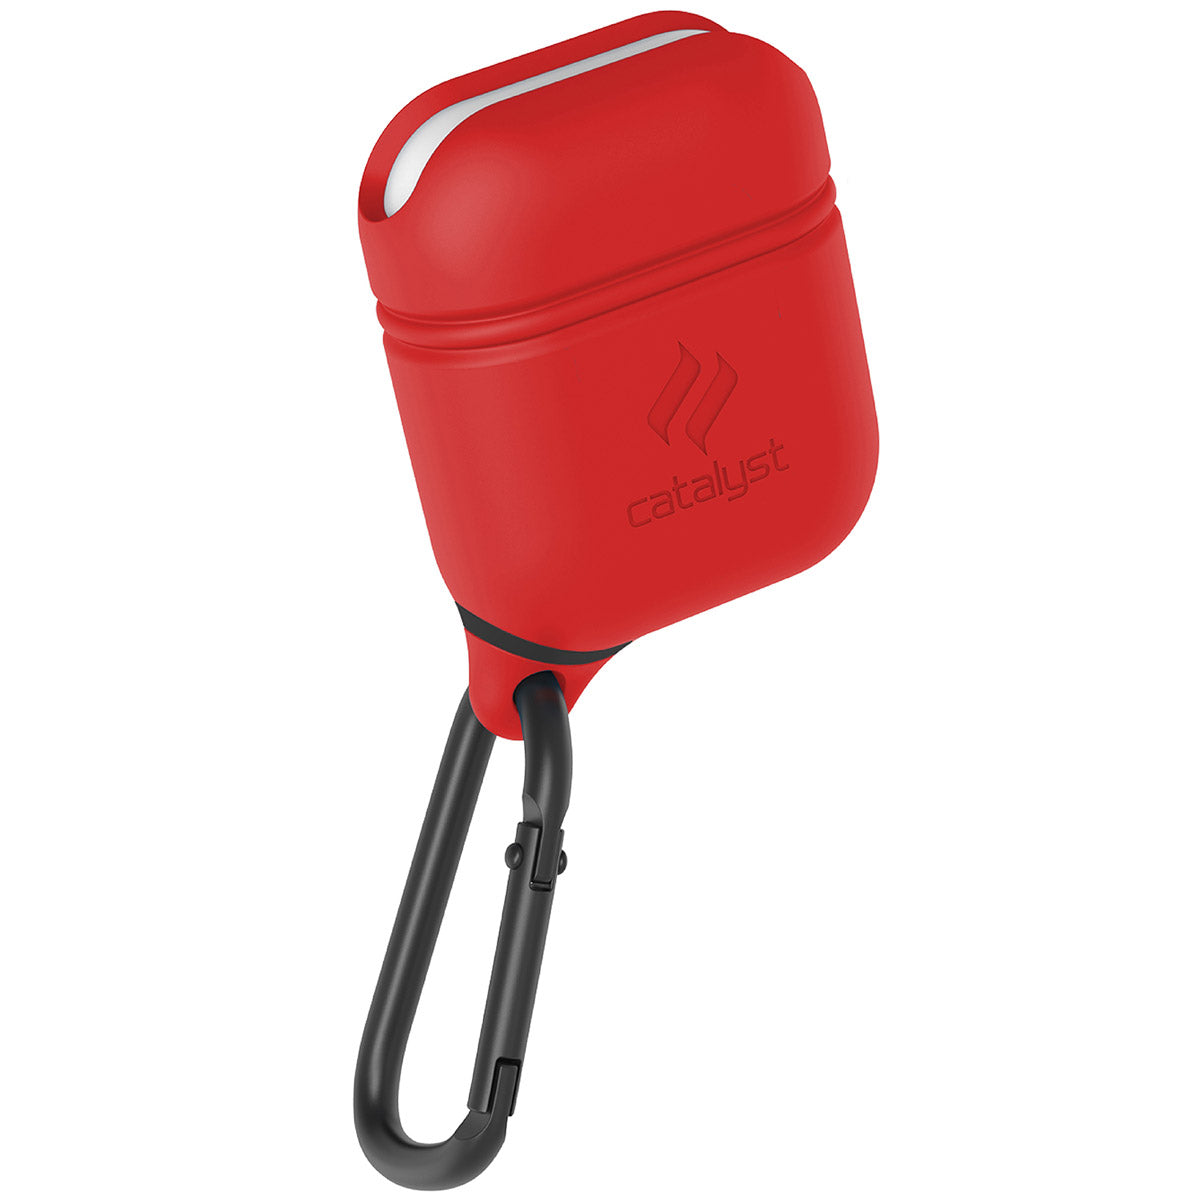 CATAPDRED | Catalyst airpods gen2/1 waterproof case + carabiner showing the front view of the case in flame red